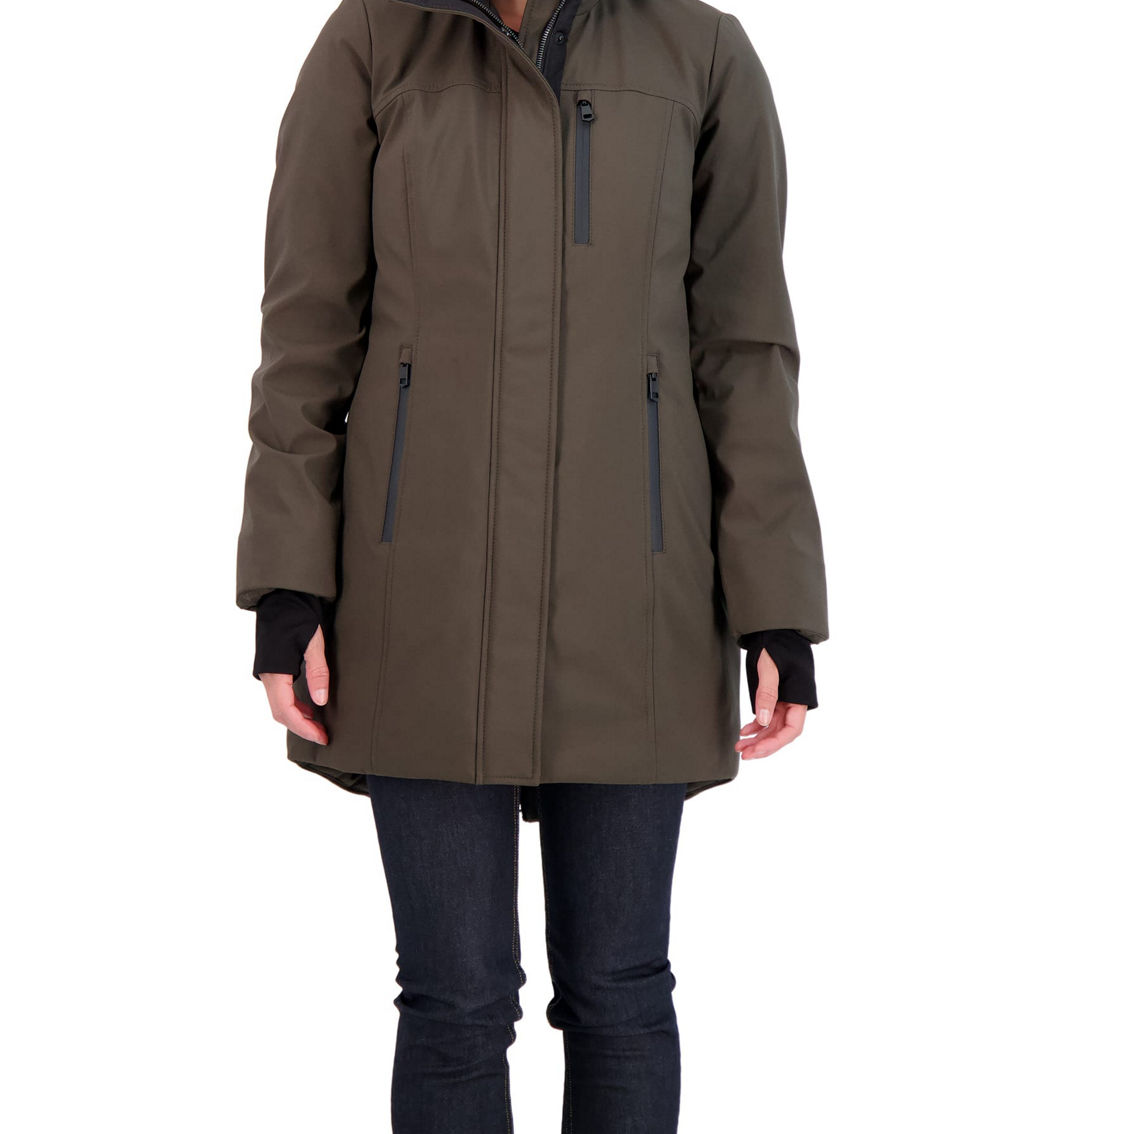 Sebby Collection Women's Heavyweight Softshell Coat - Image 3 of 3